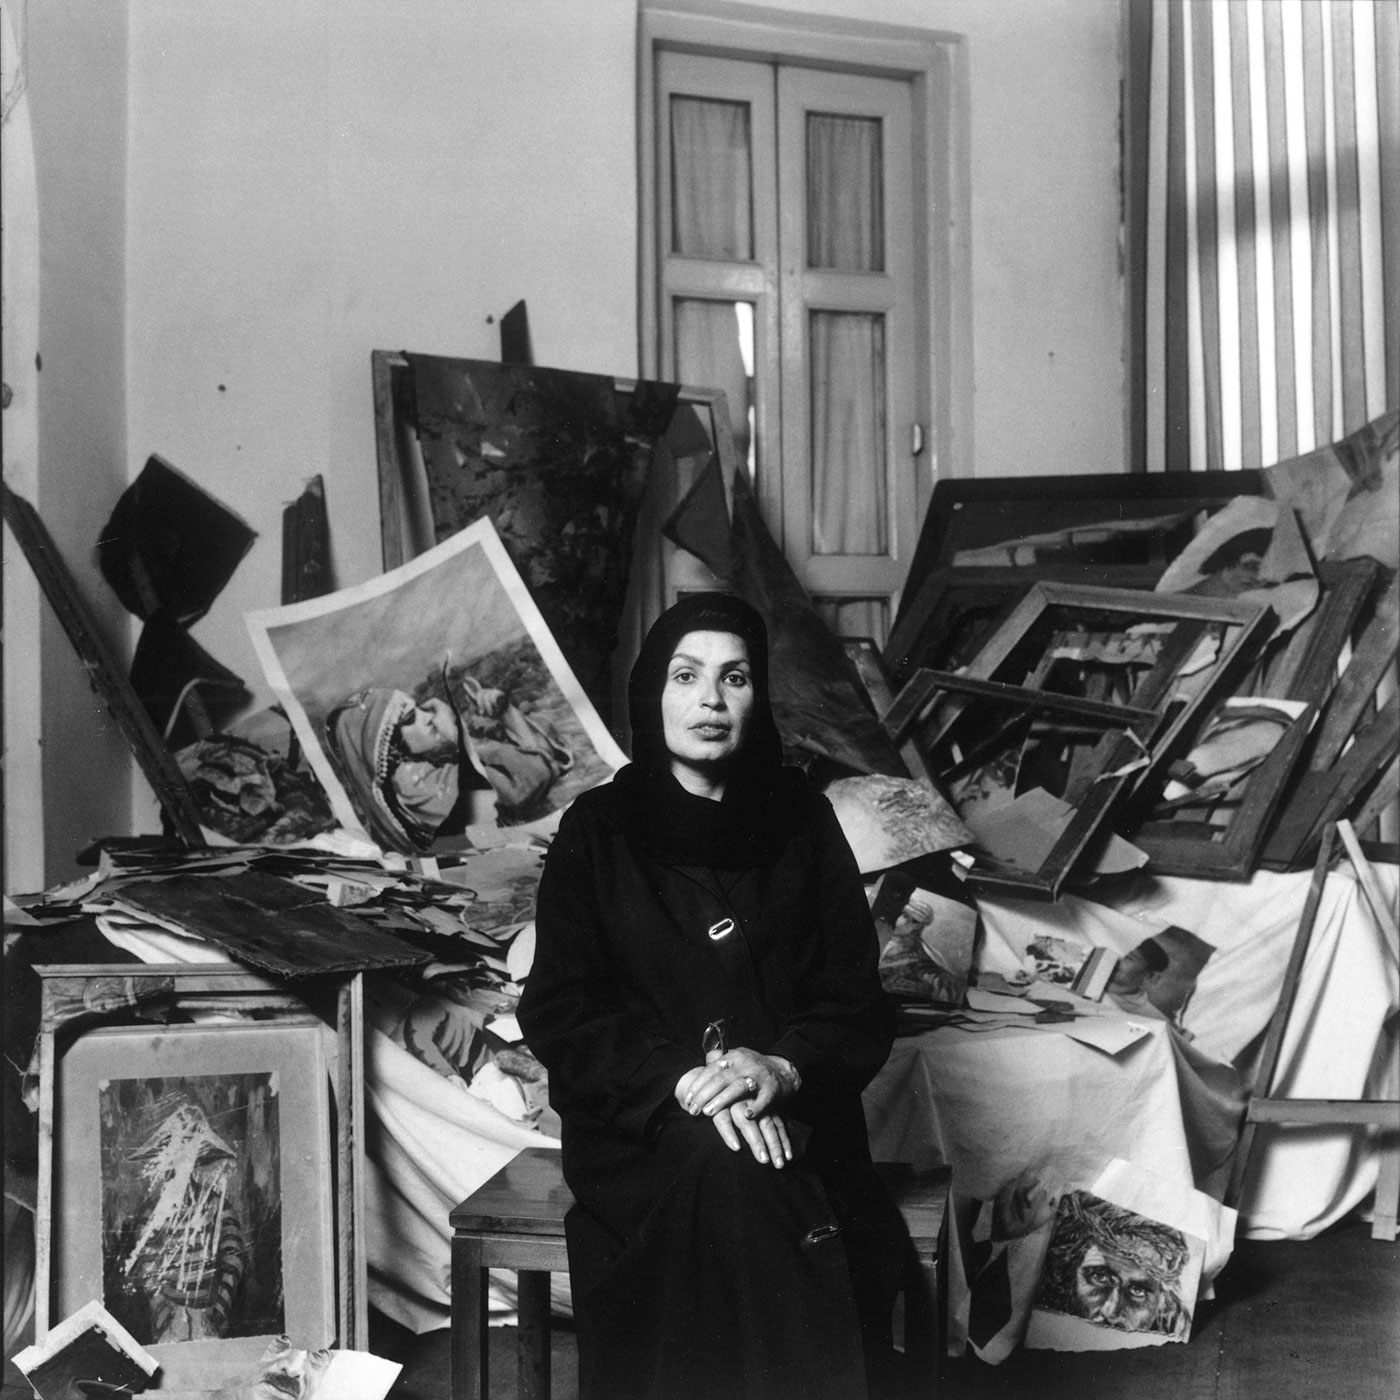 Black and white photograph of a seated woman wearing a head covering and dark clothing. Behind her is a tall, disorganized heap of damaged artwork and empty frames.